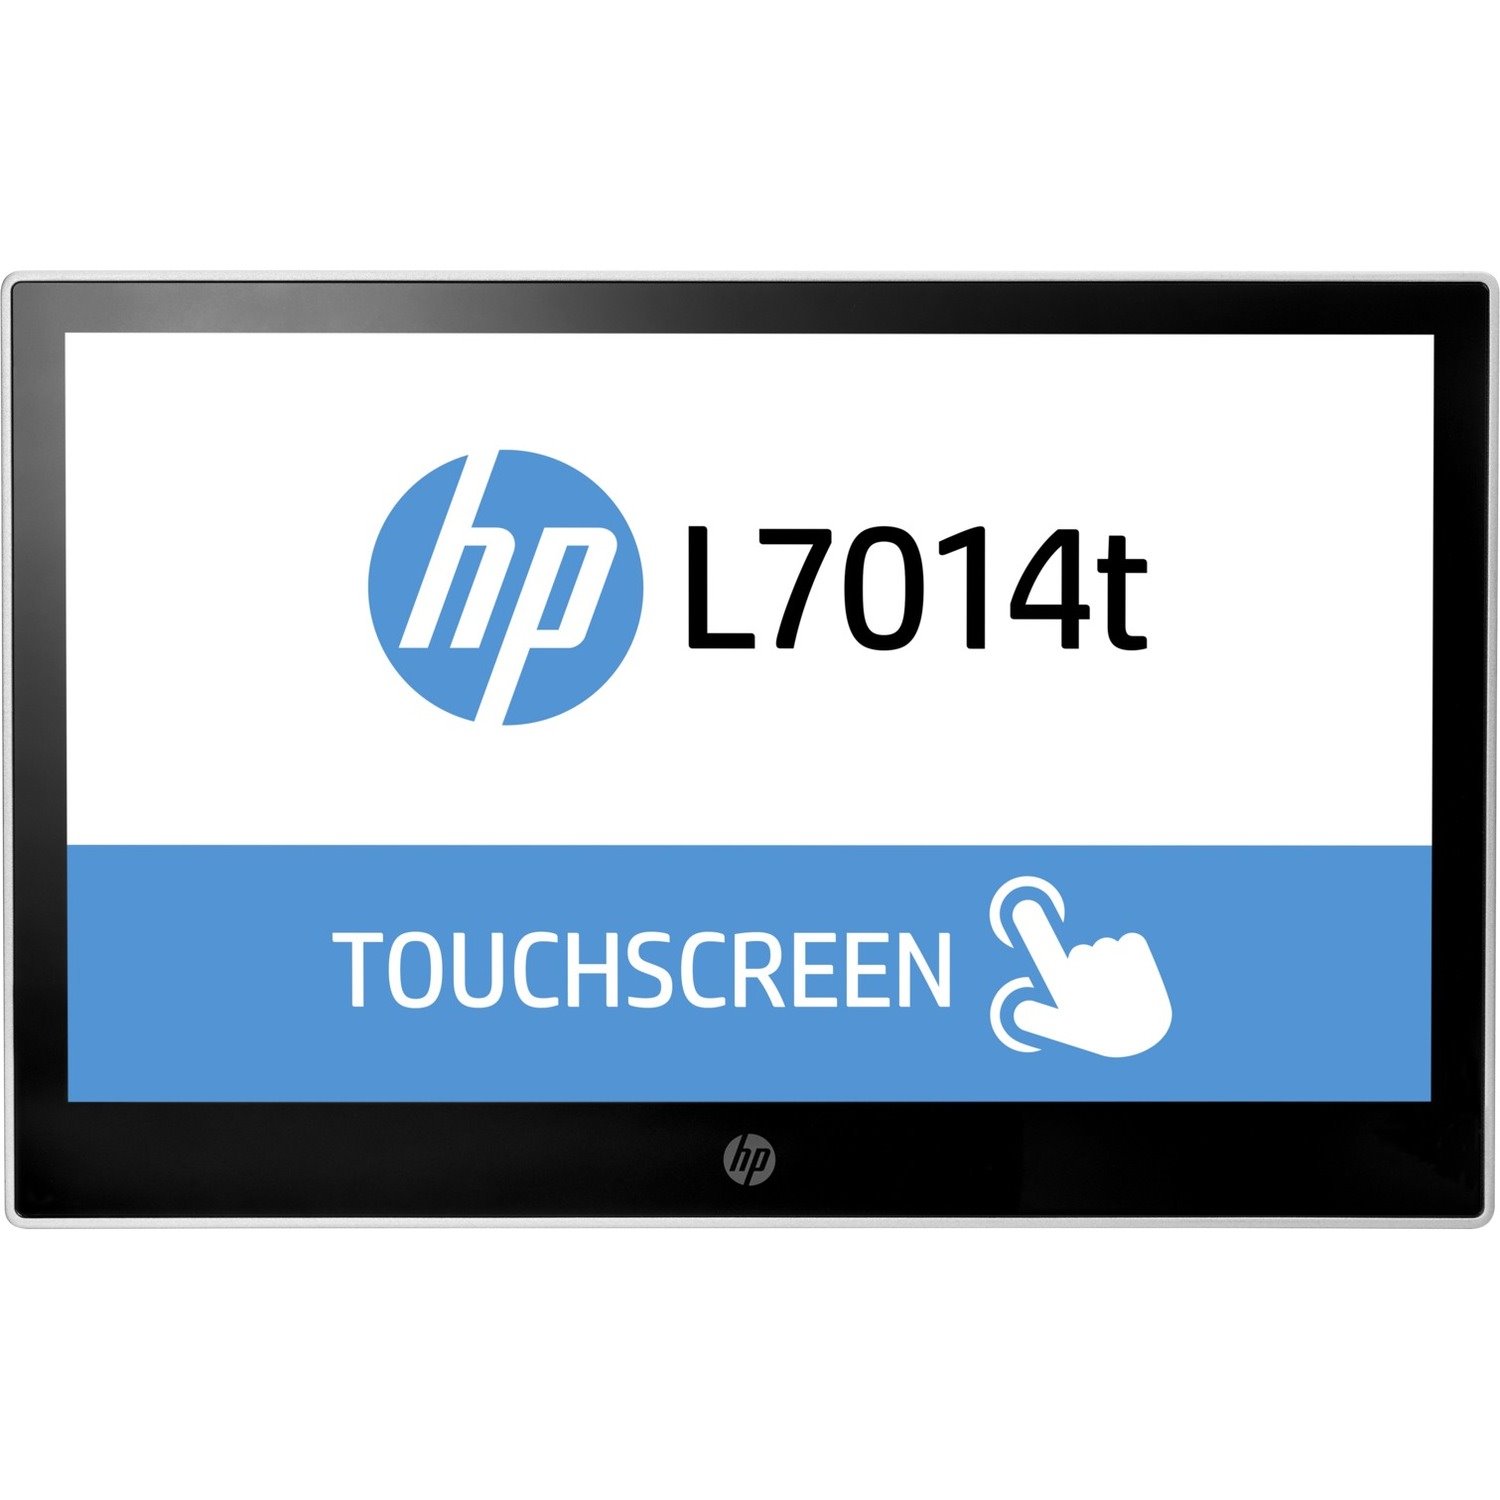 HP L7014t 35.6 cm (14") LED Touchscreen Monitor - 16:9 - 16 ms